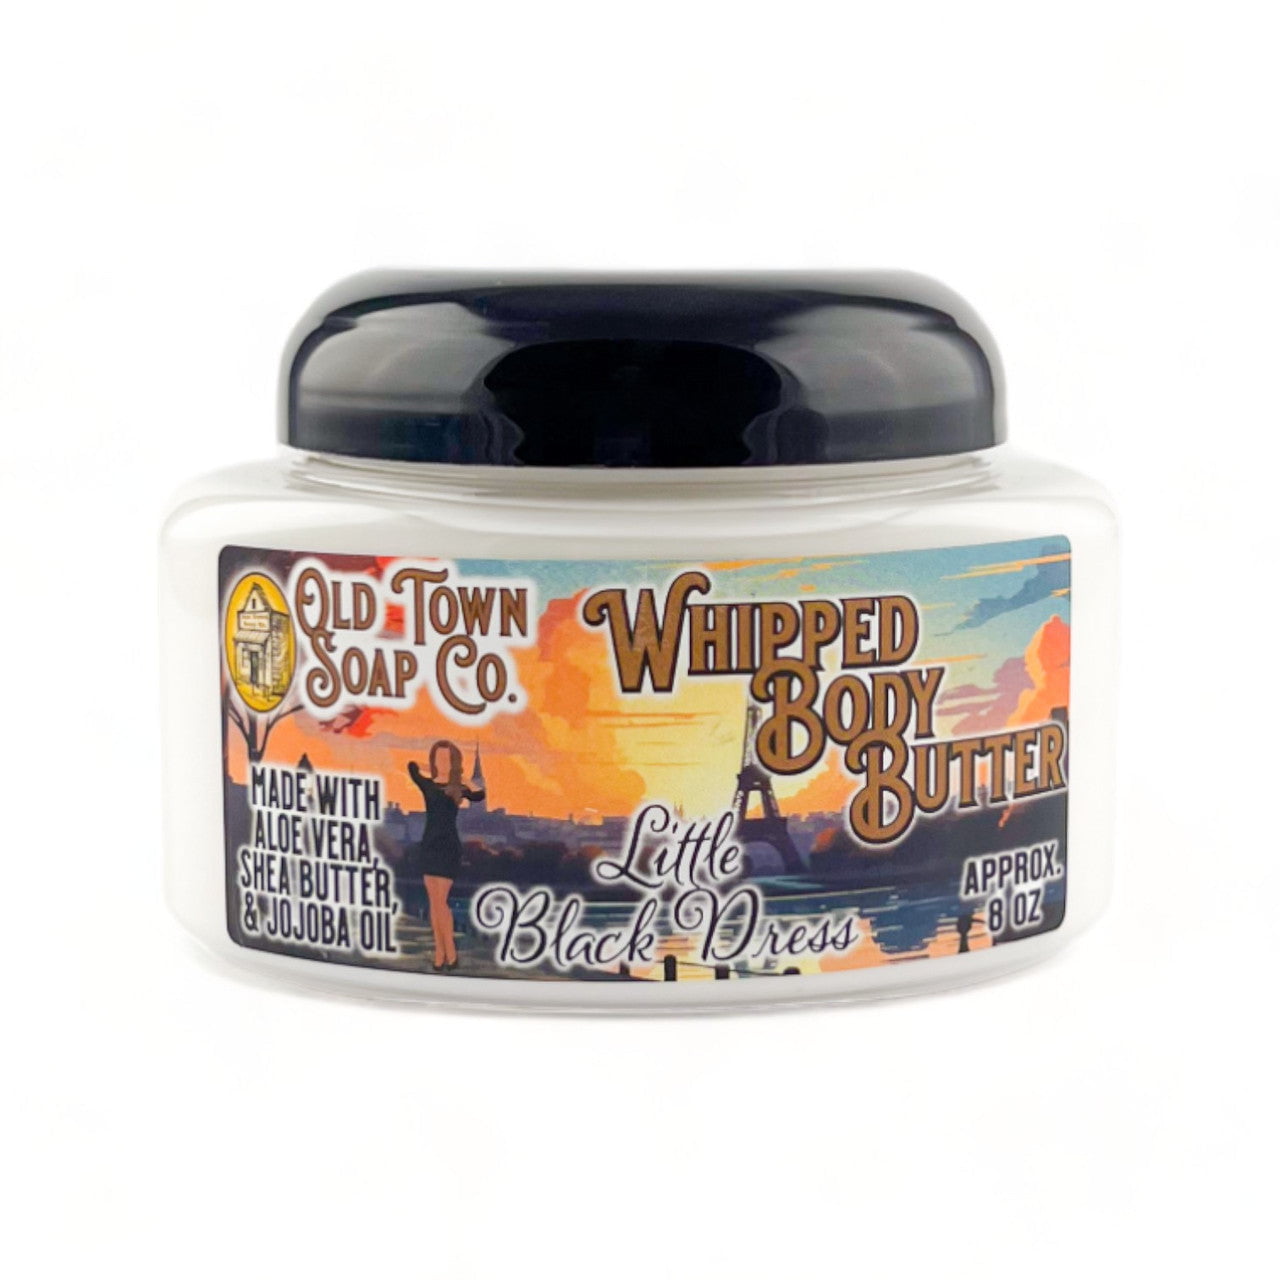 Little Black Dress -Whipped Body Butter - Old Town Soap Co.